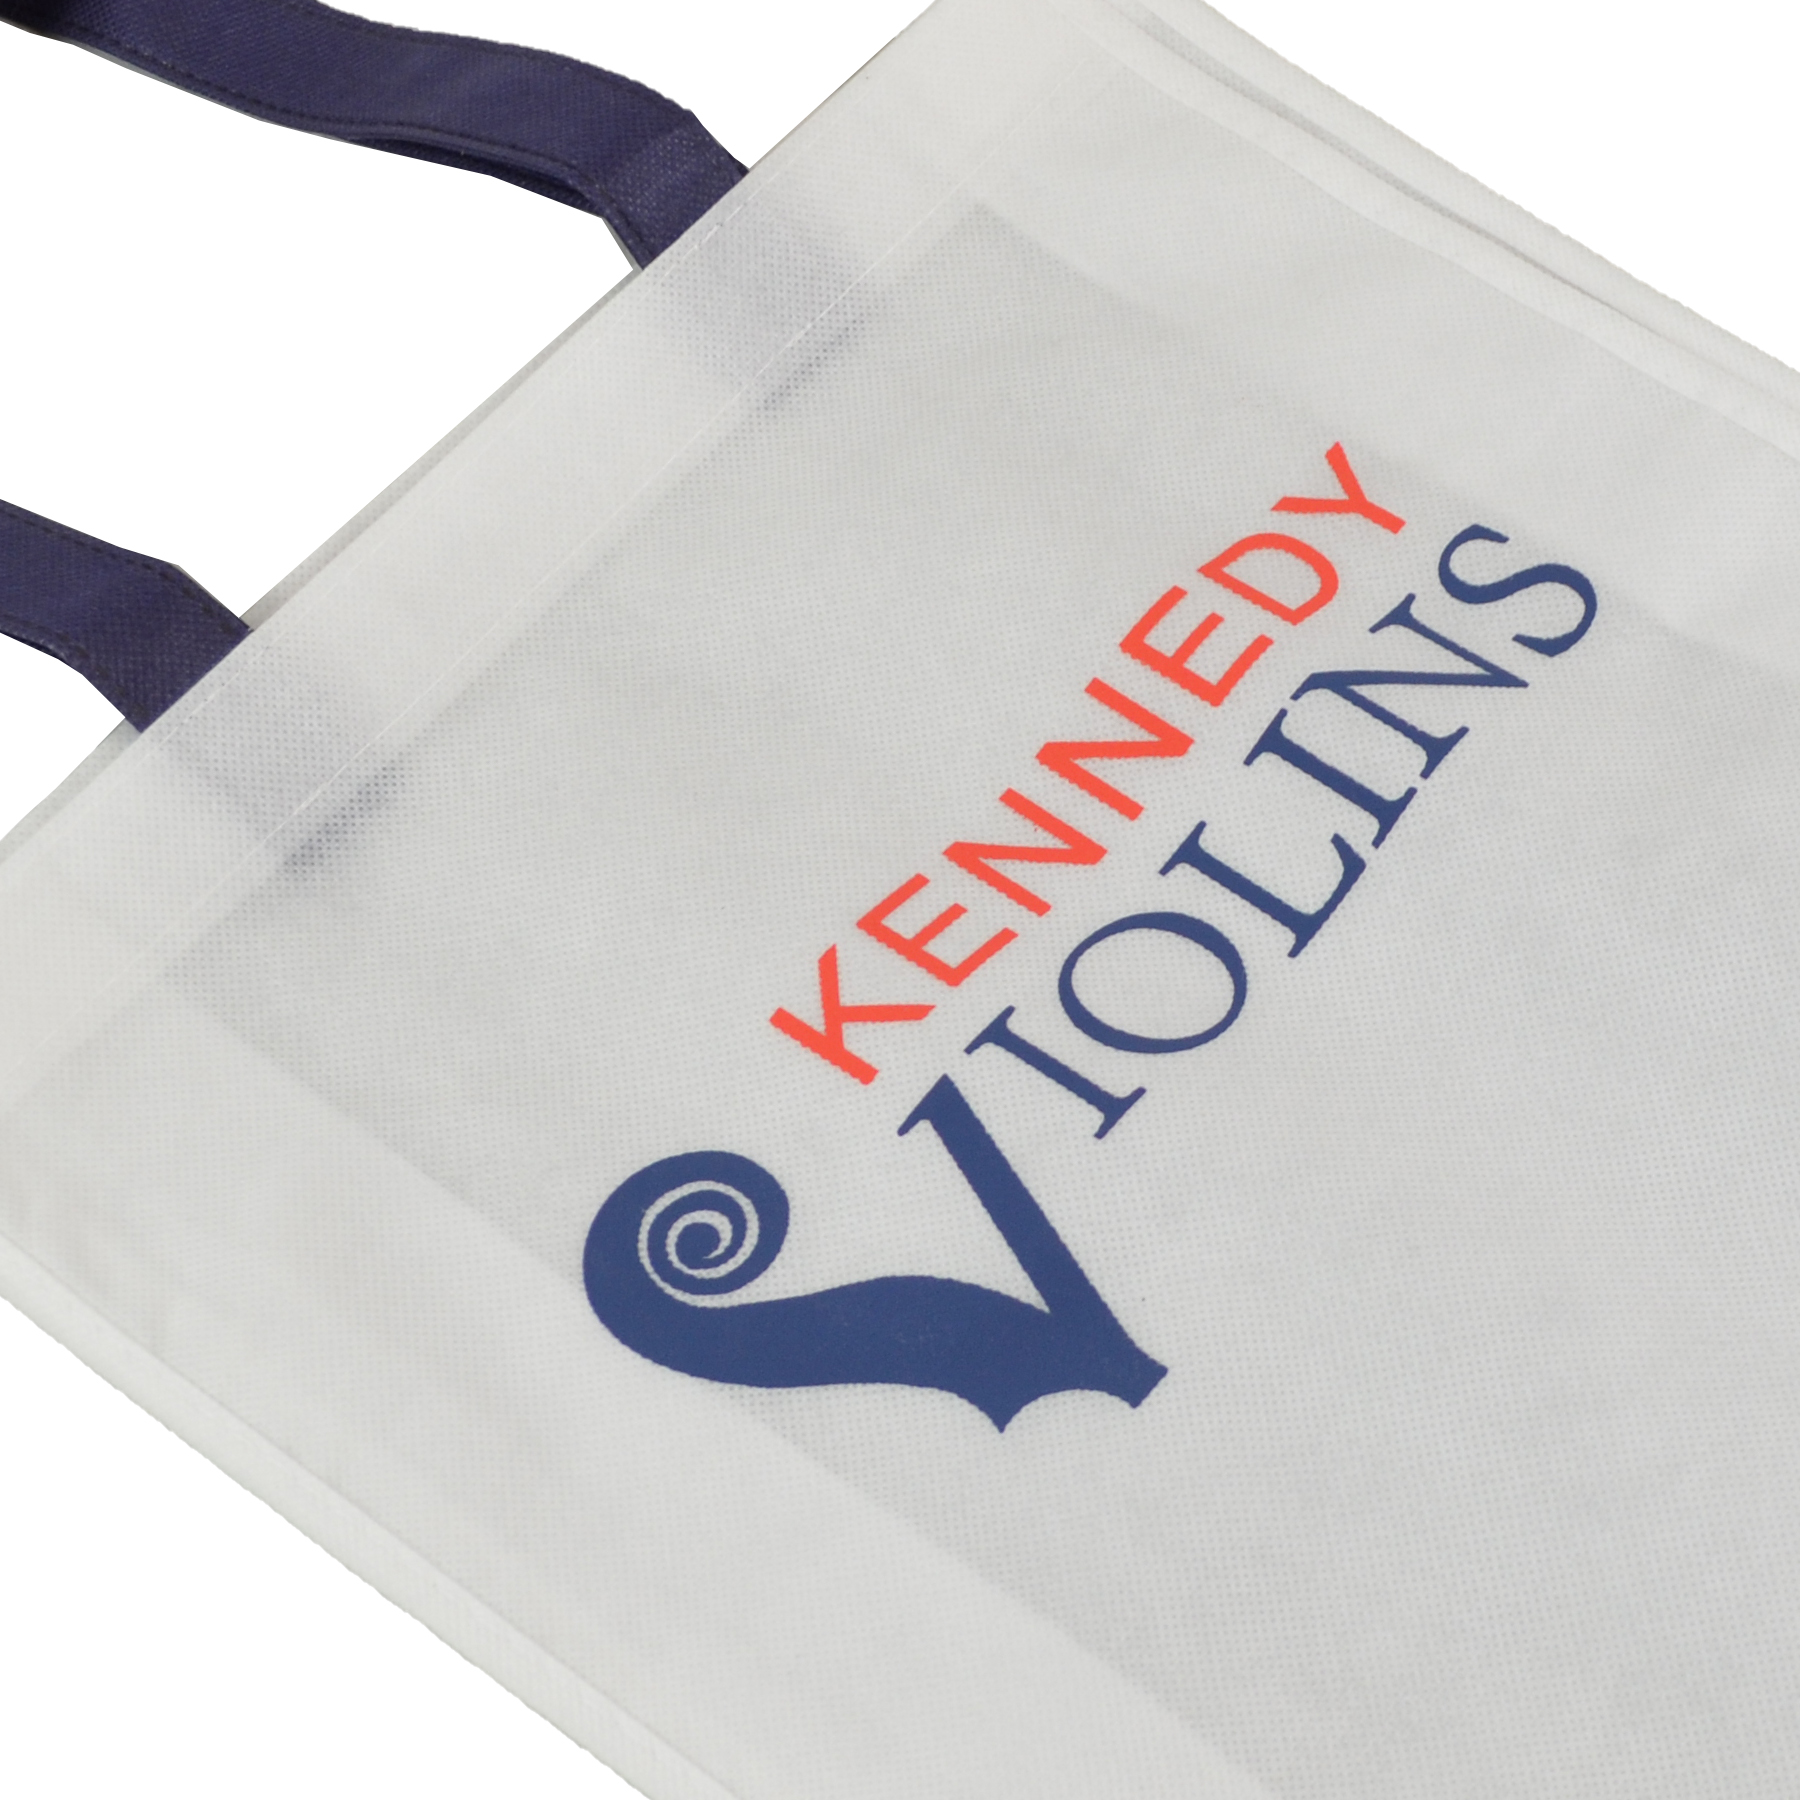 Kennedy Violins Tote Bag in action